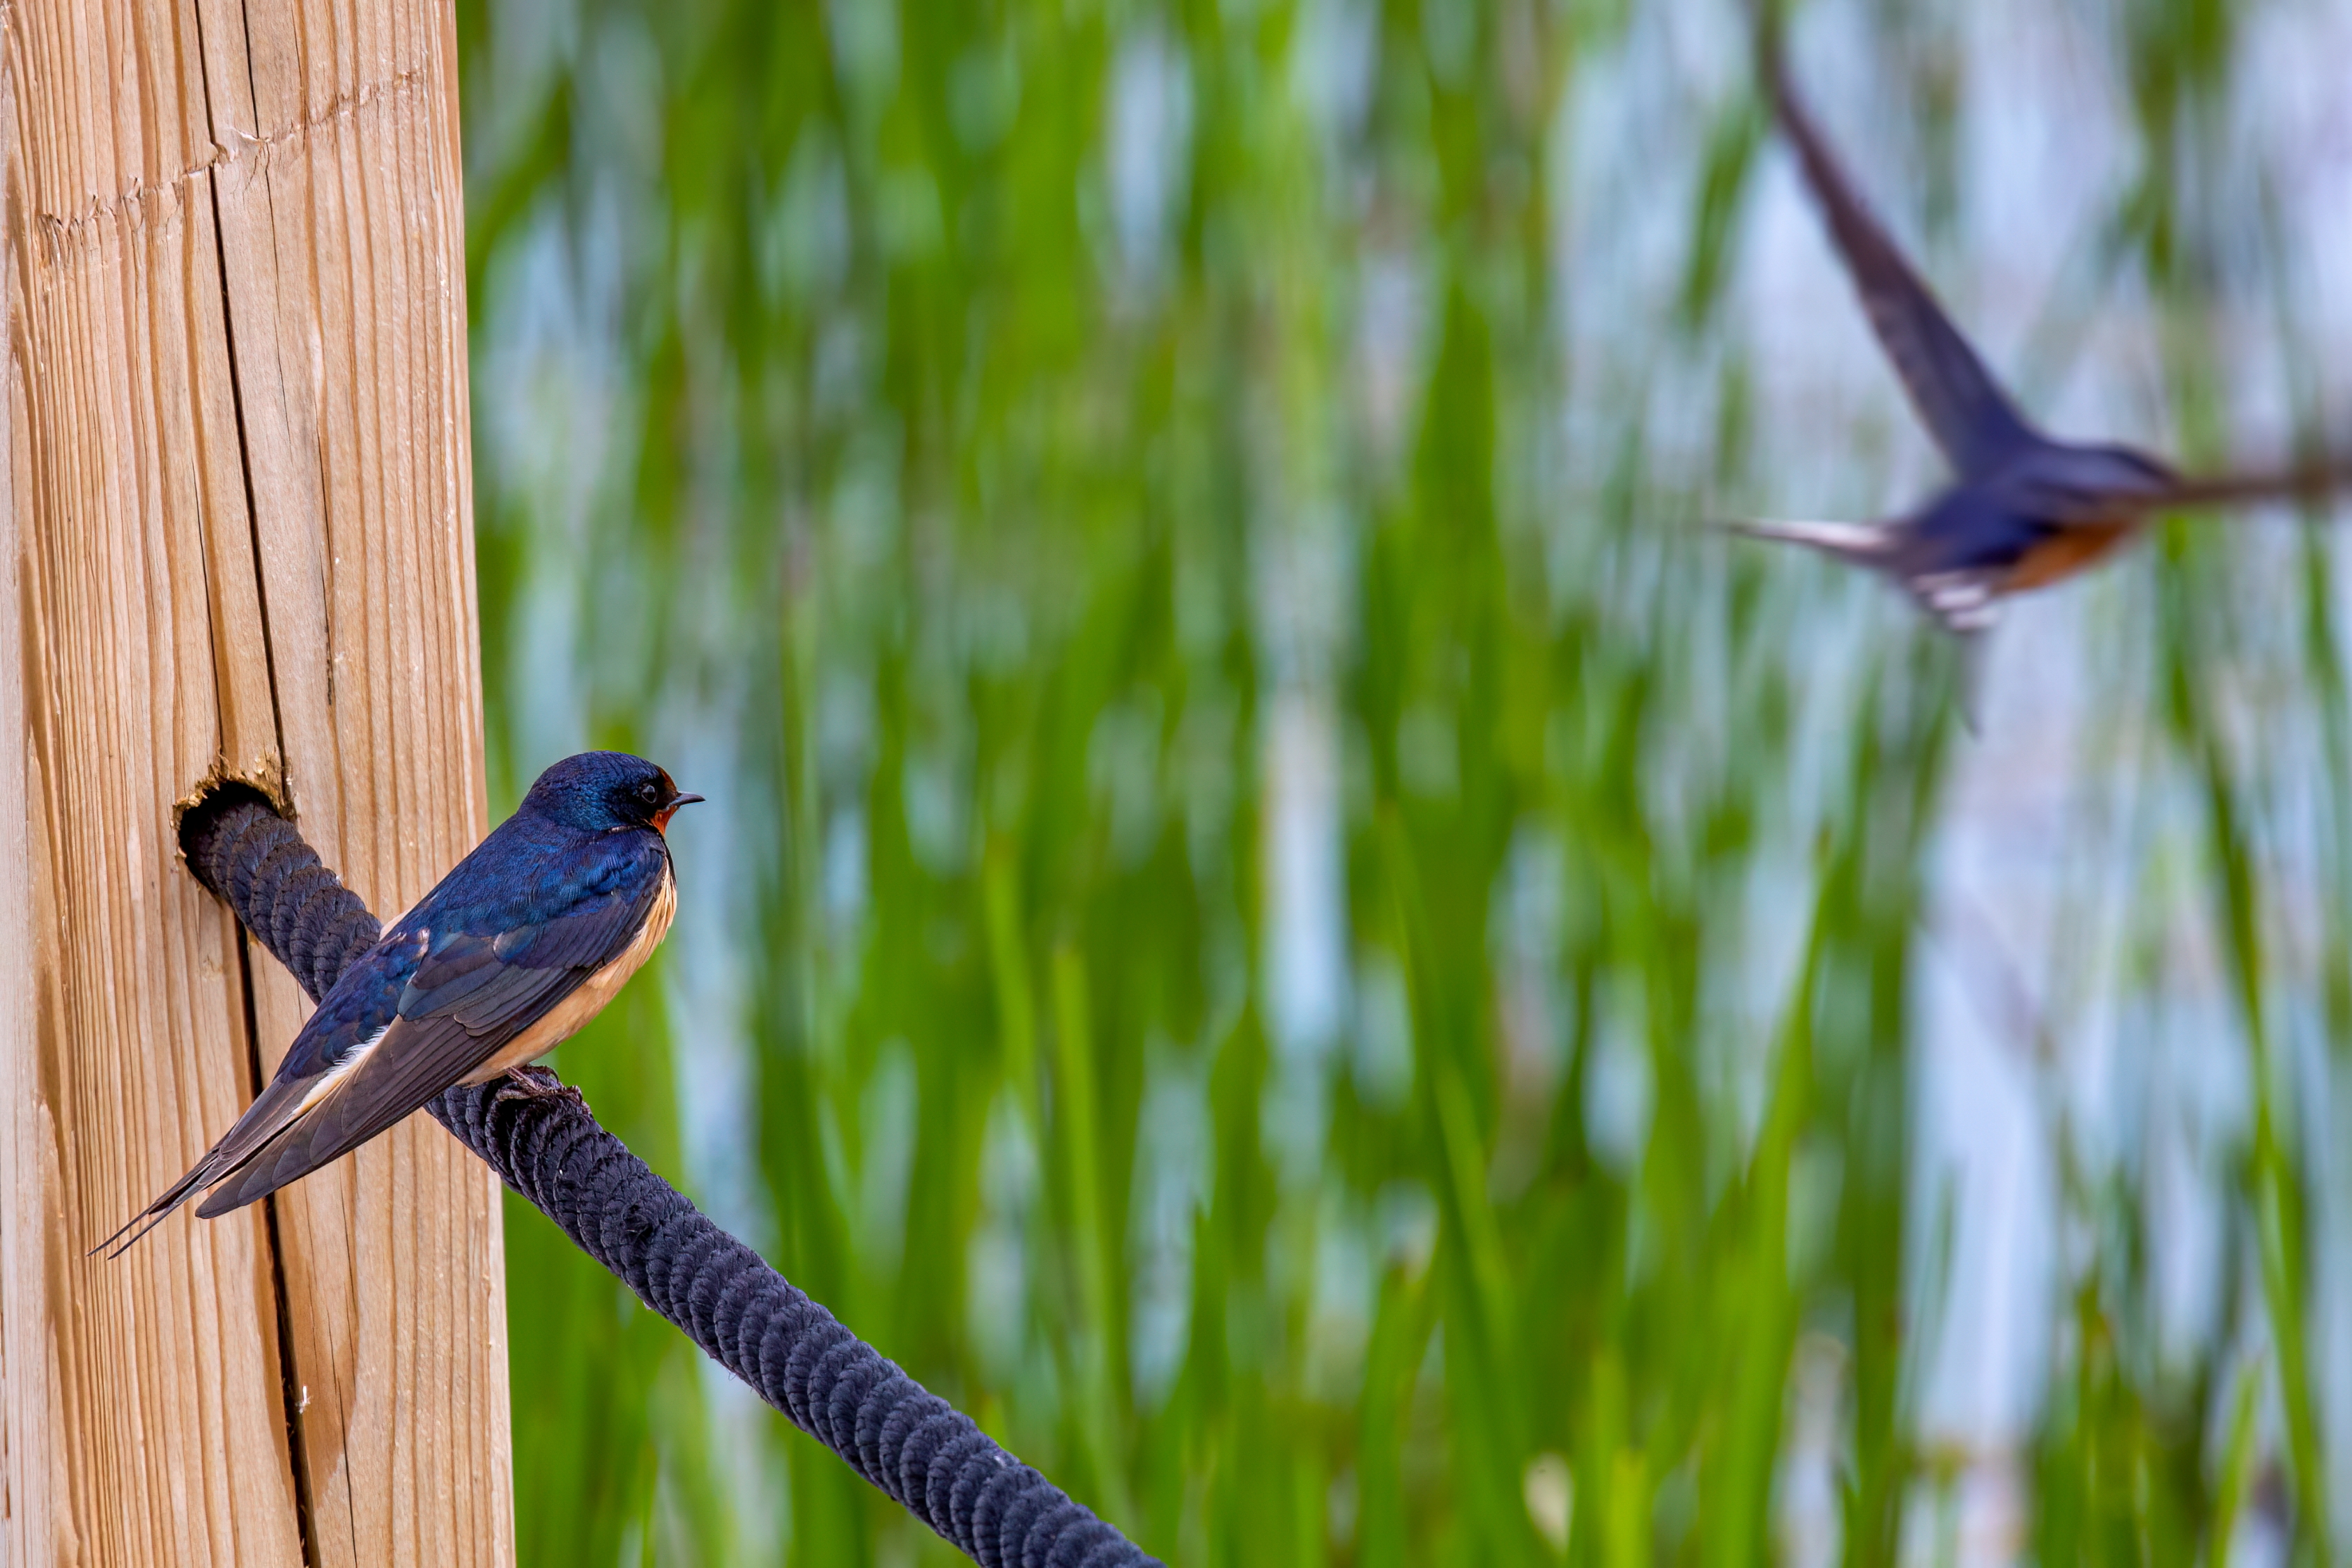 A barn swallow perched on a fence wire while another barn swallow flies off. 